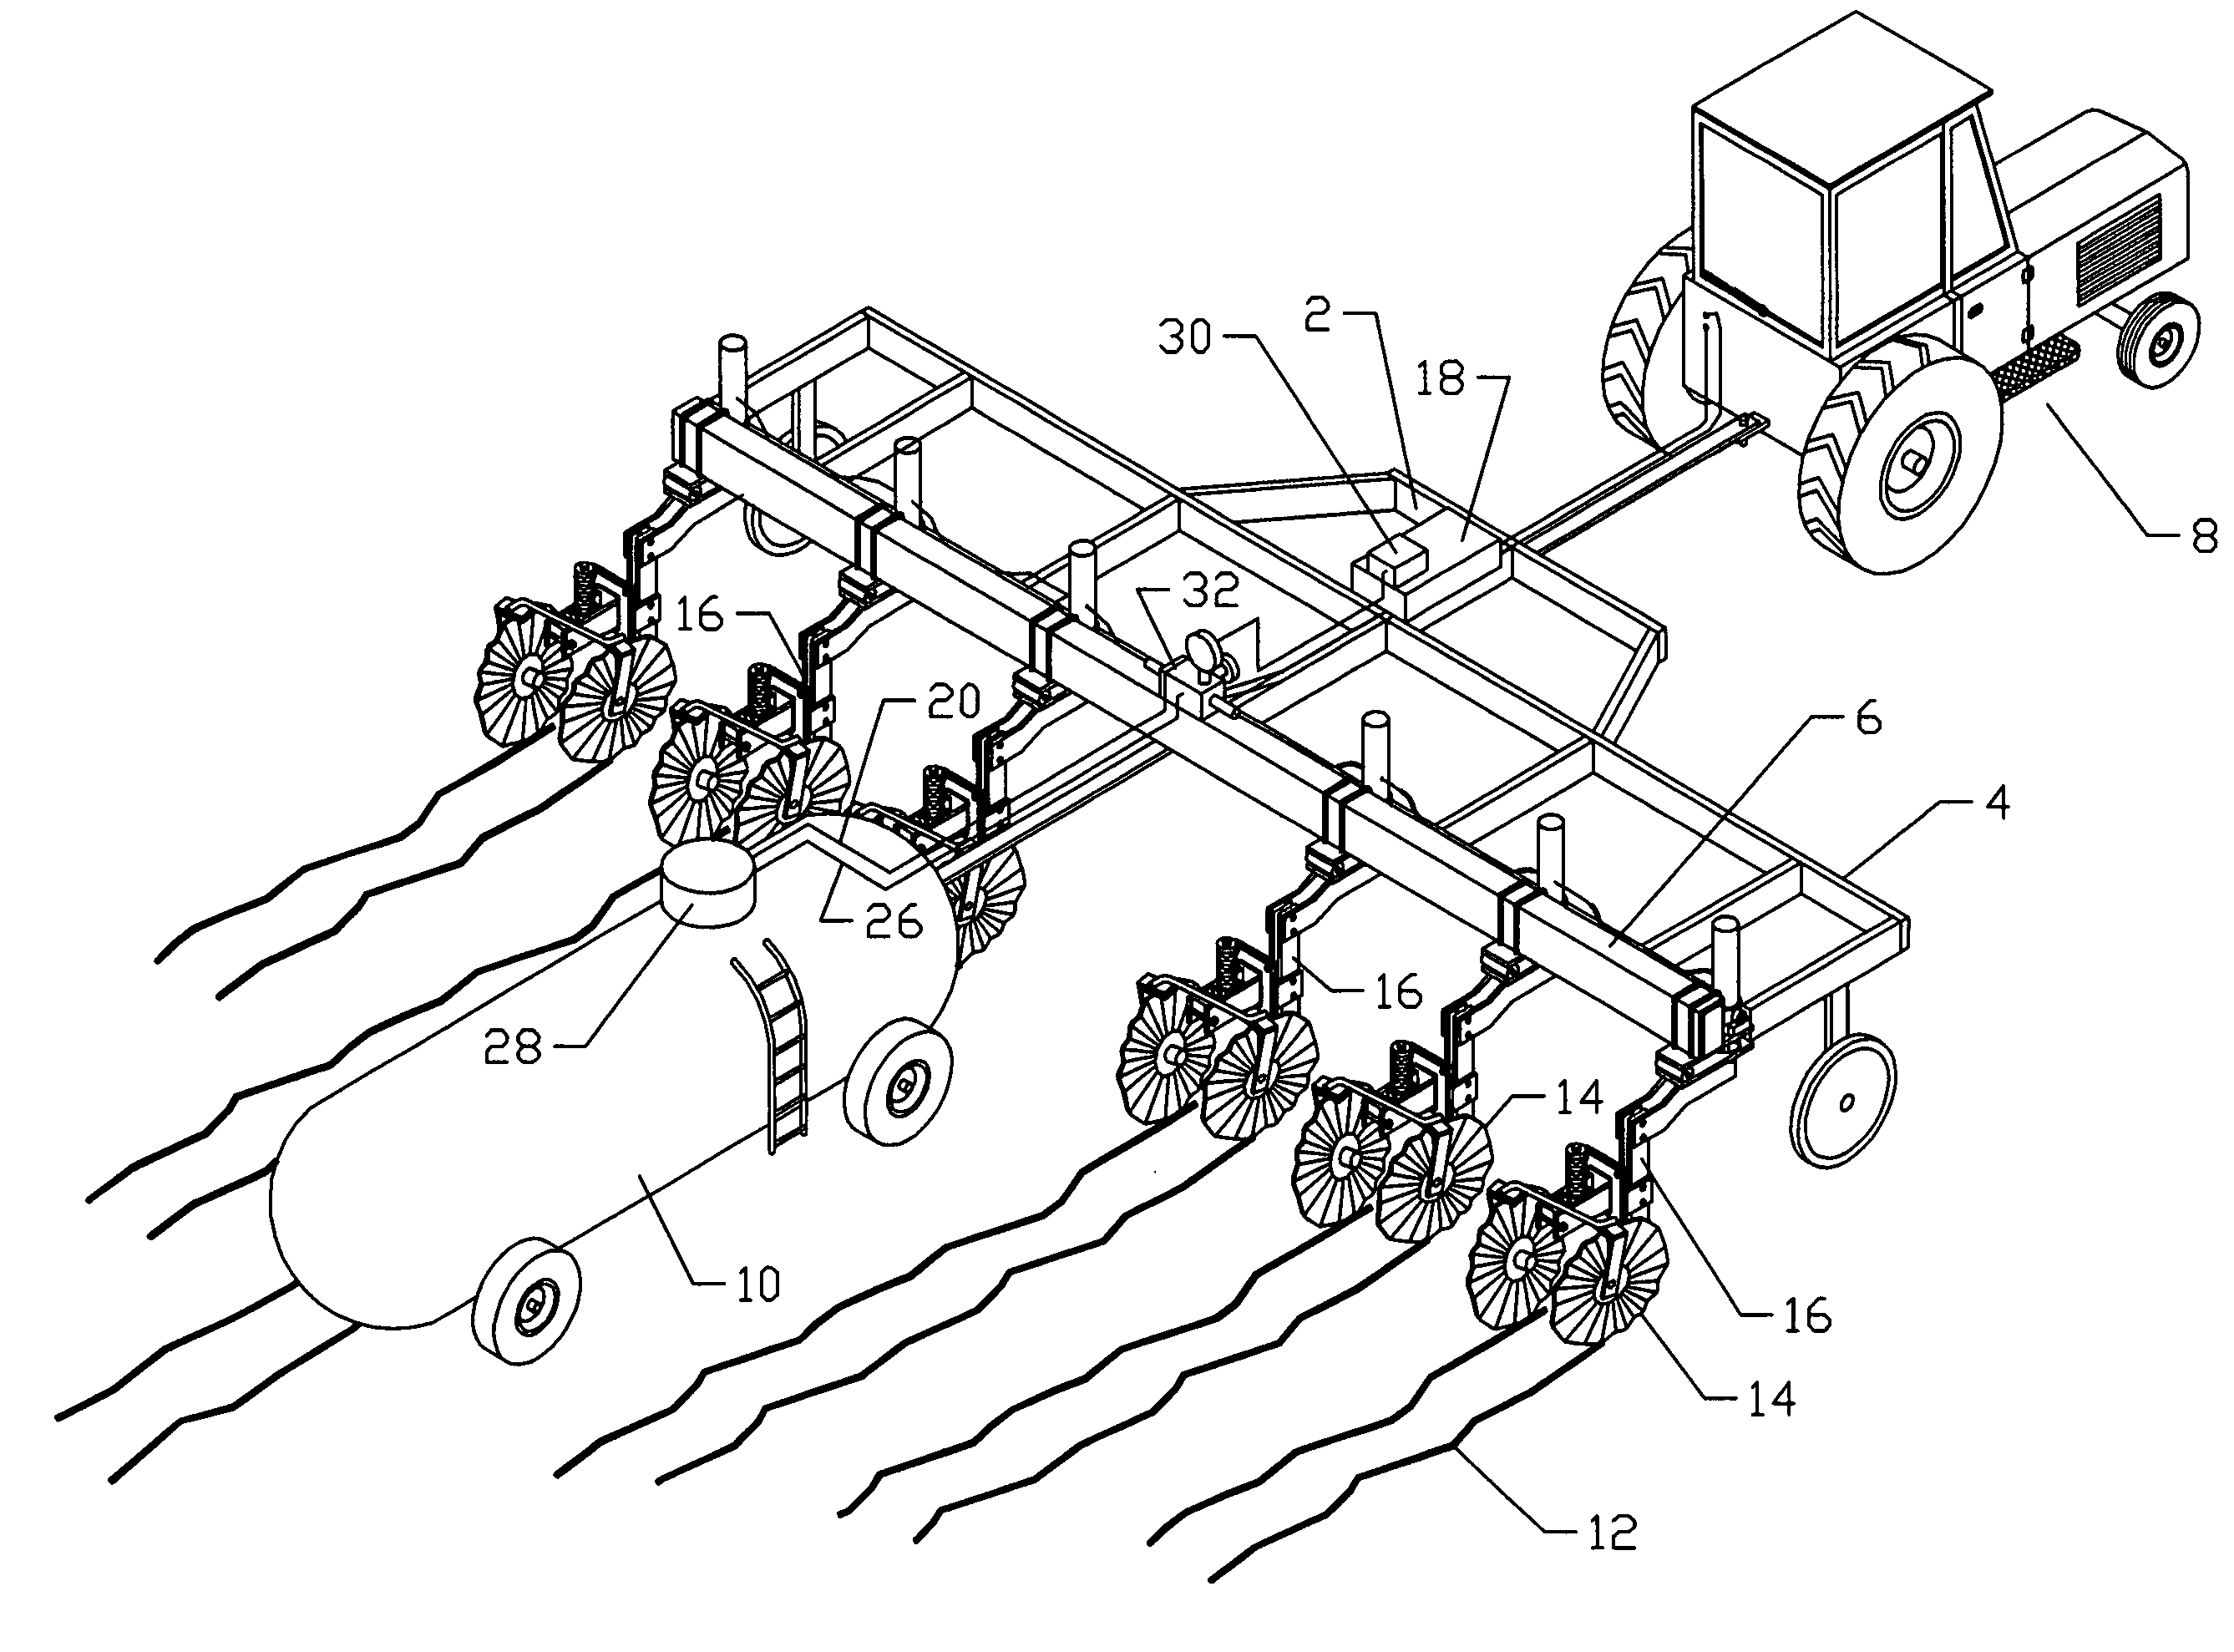 Apparatus and method to improve field application of anhydrous ammonia in cold temperatures